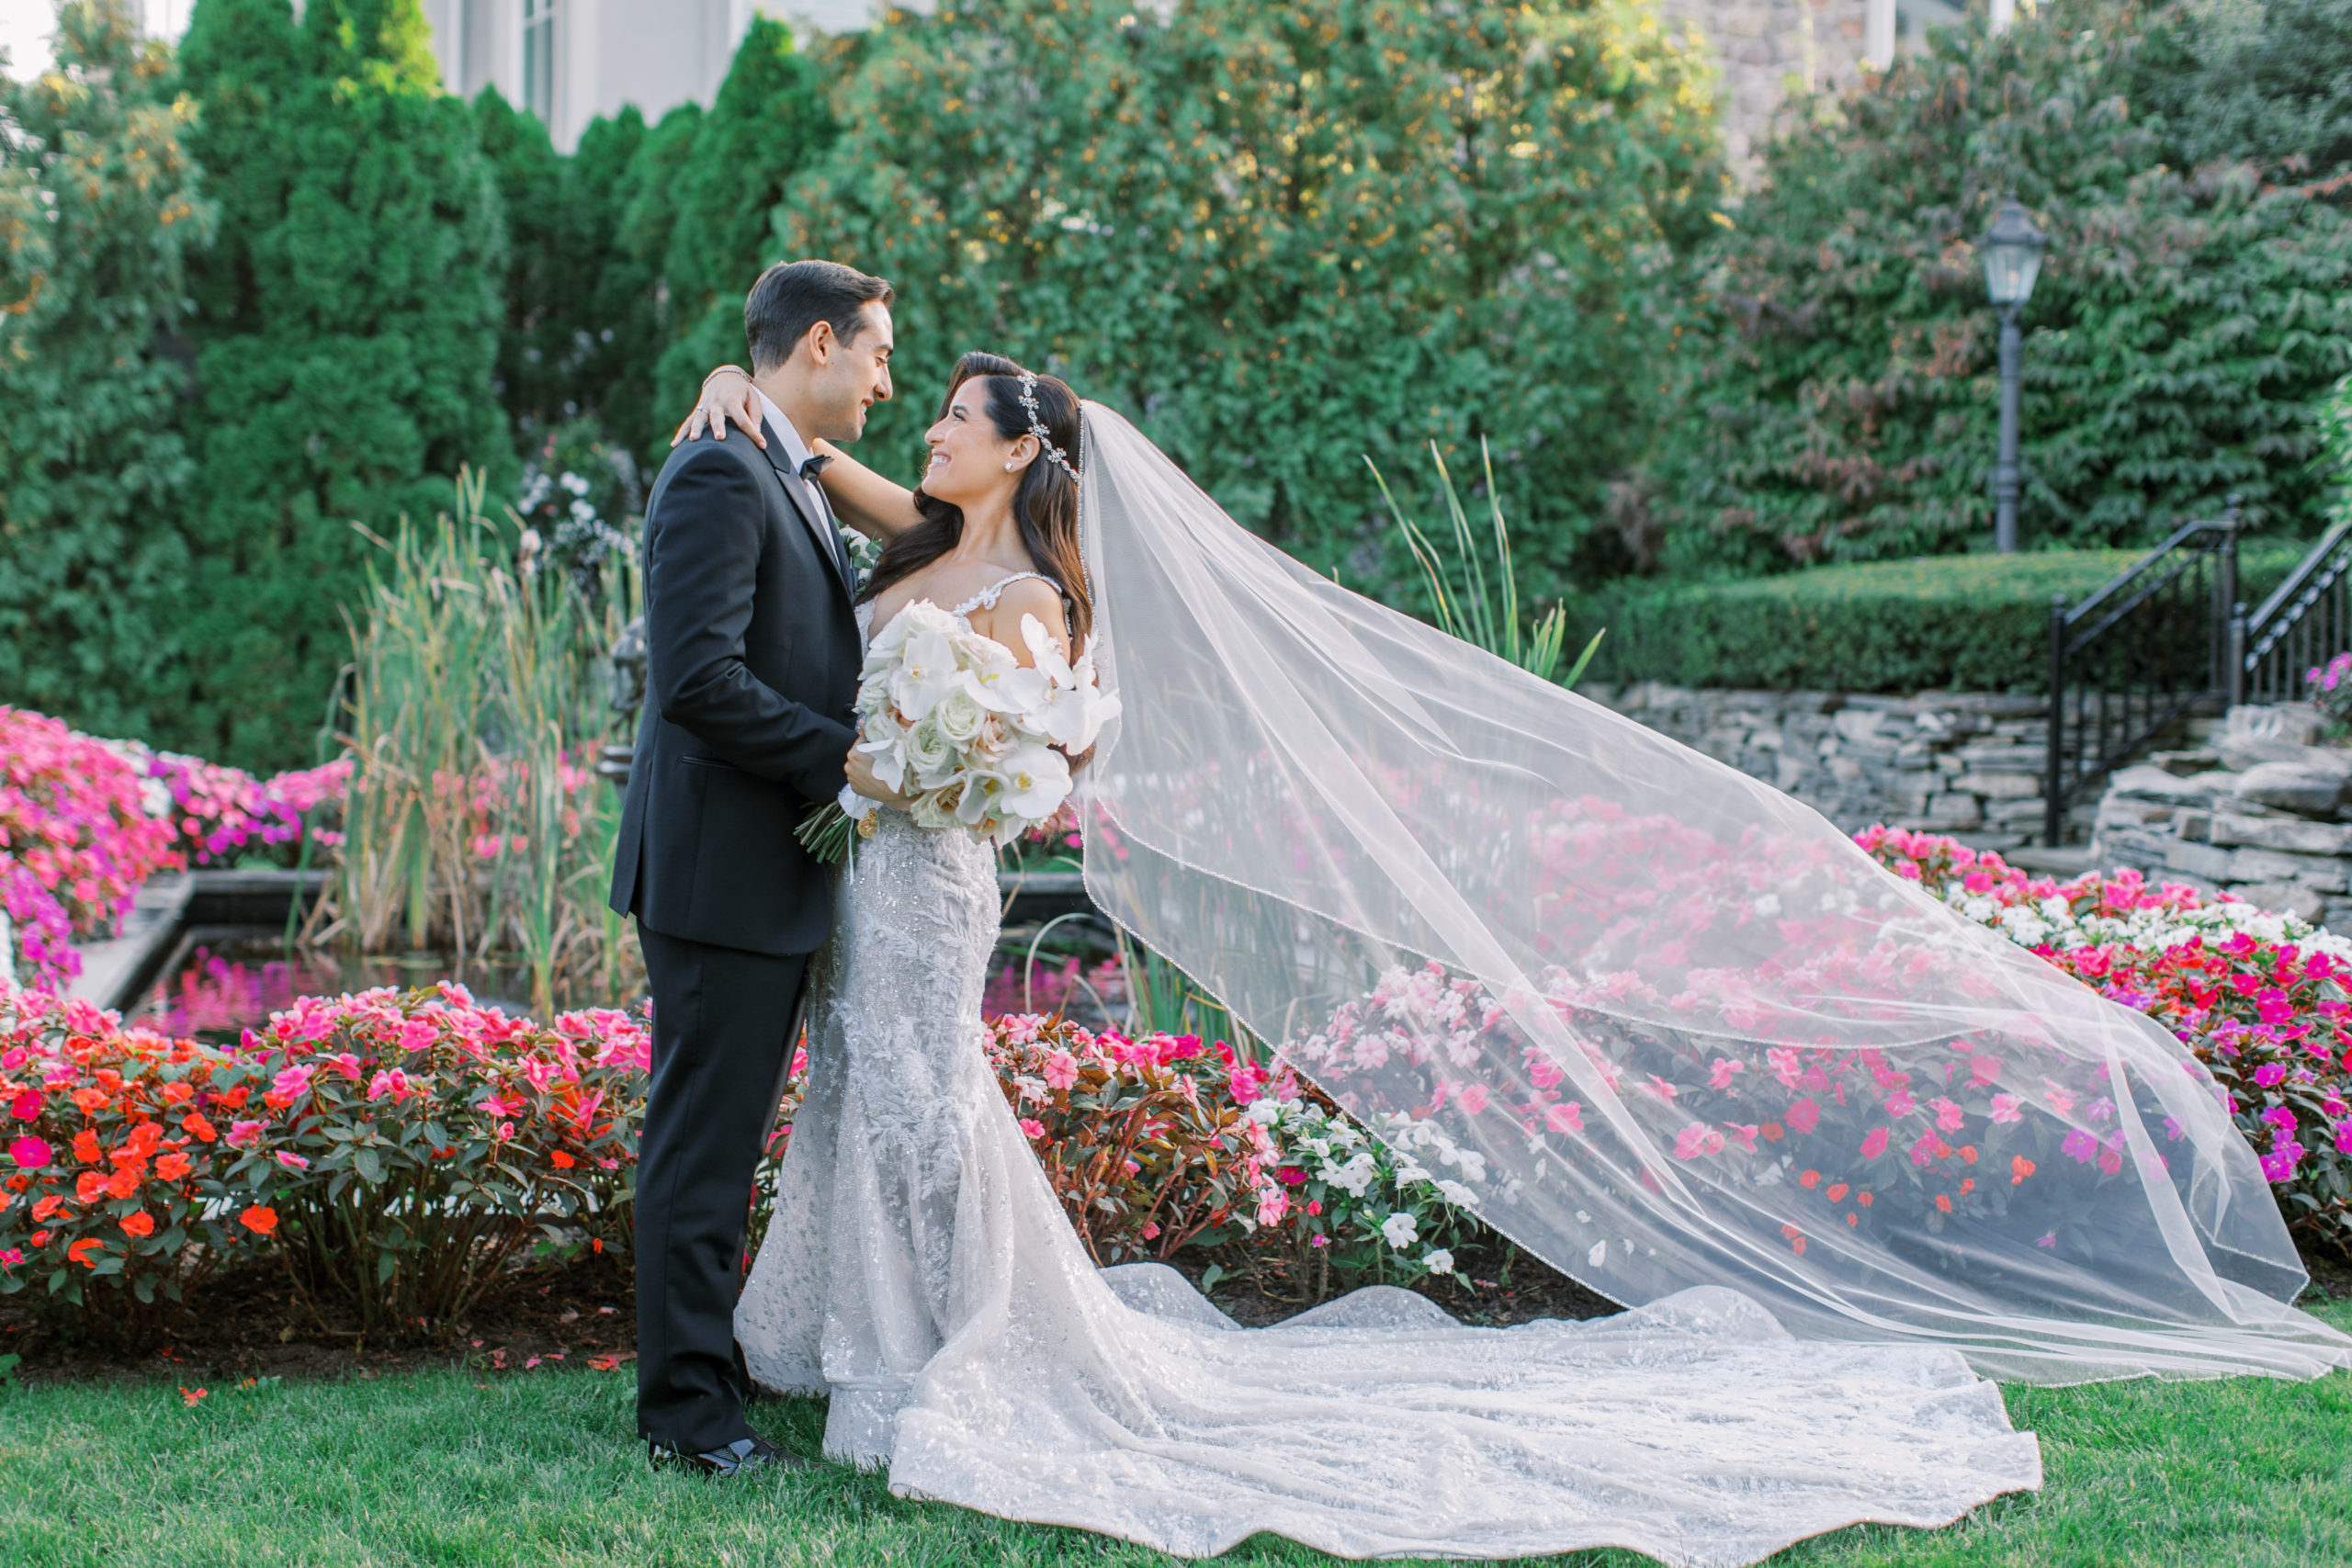 Bride and groom smile in the garden as bride's veil flows behind her - Park Savoy Wedding Photography